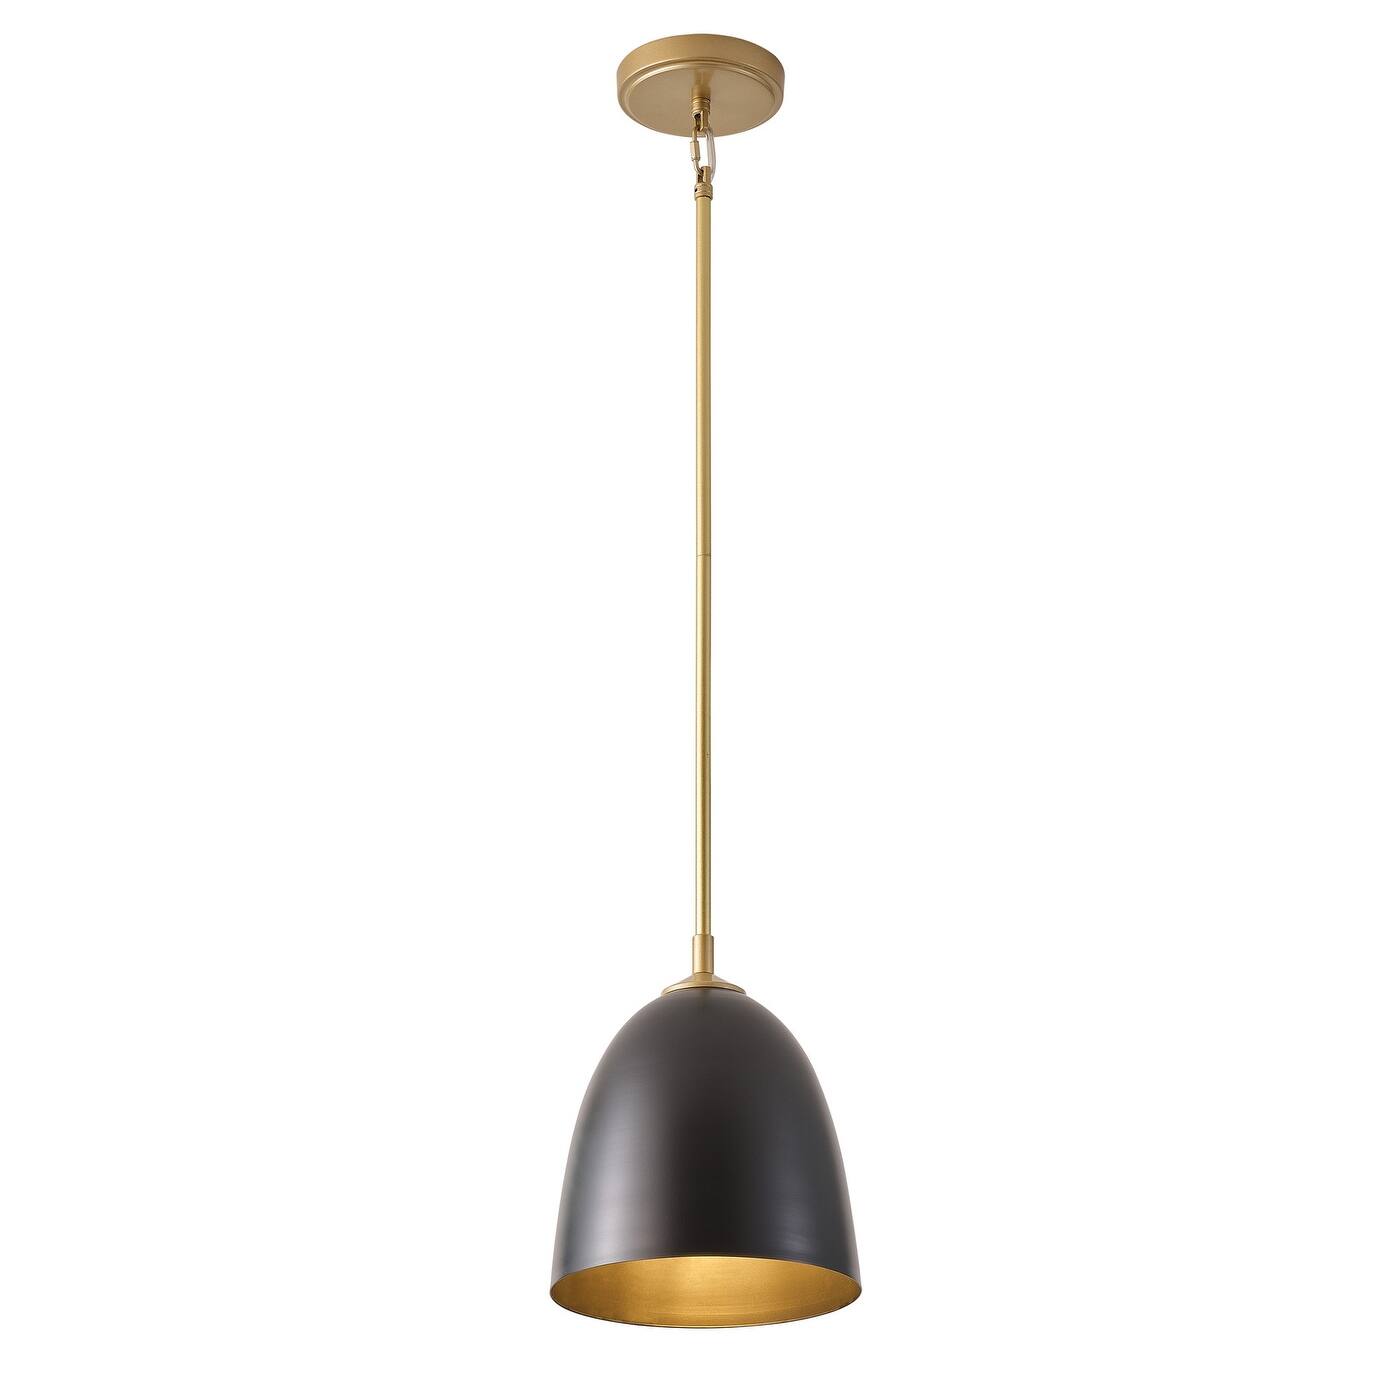 Vintage Black Concise Domed Pendant Light with Metal Shade - Bed Bath ...